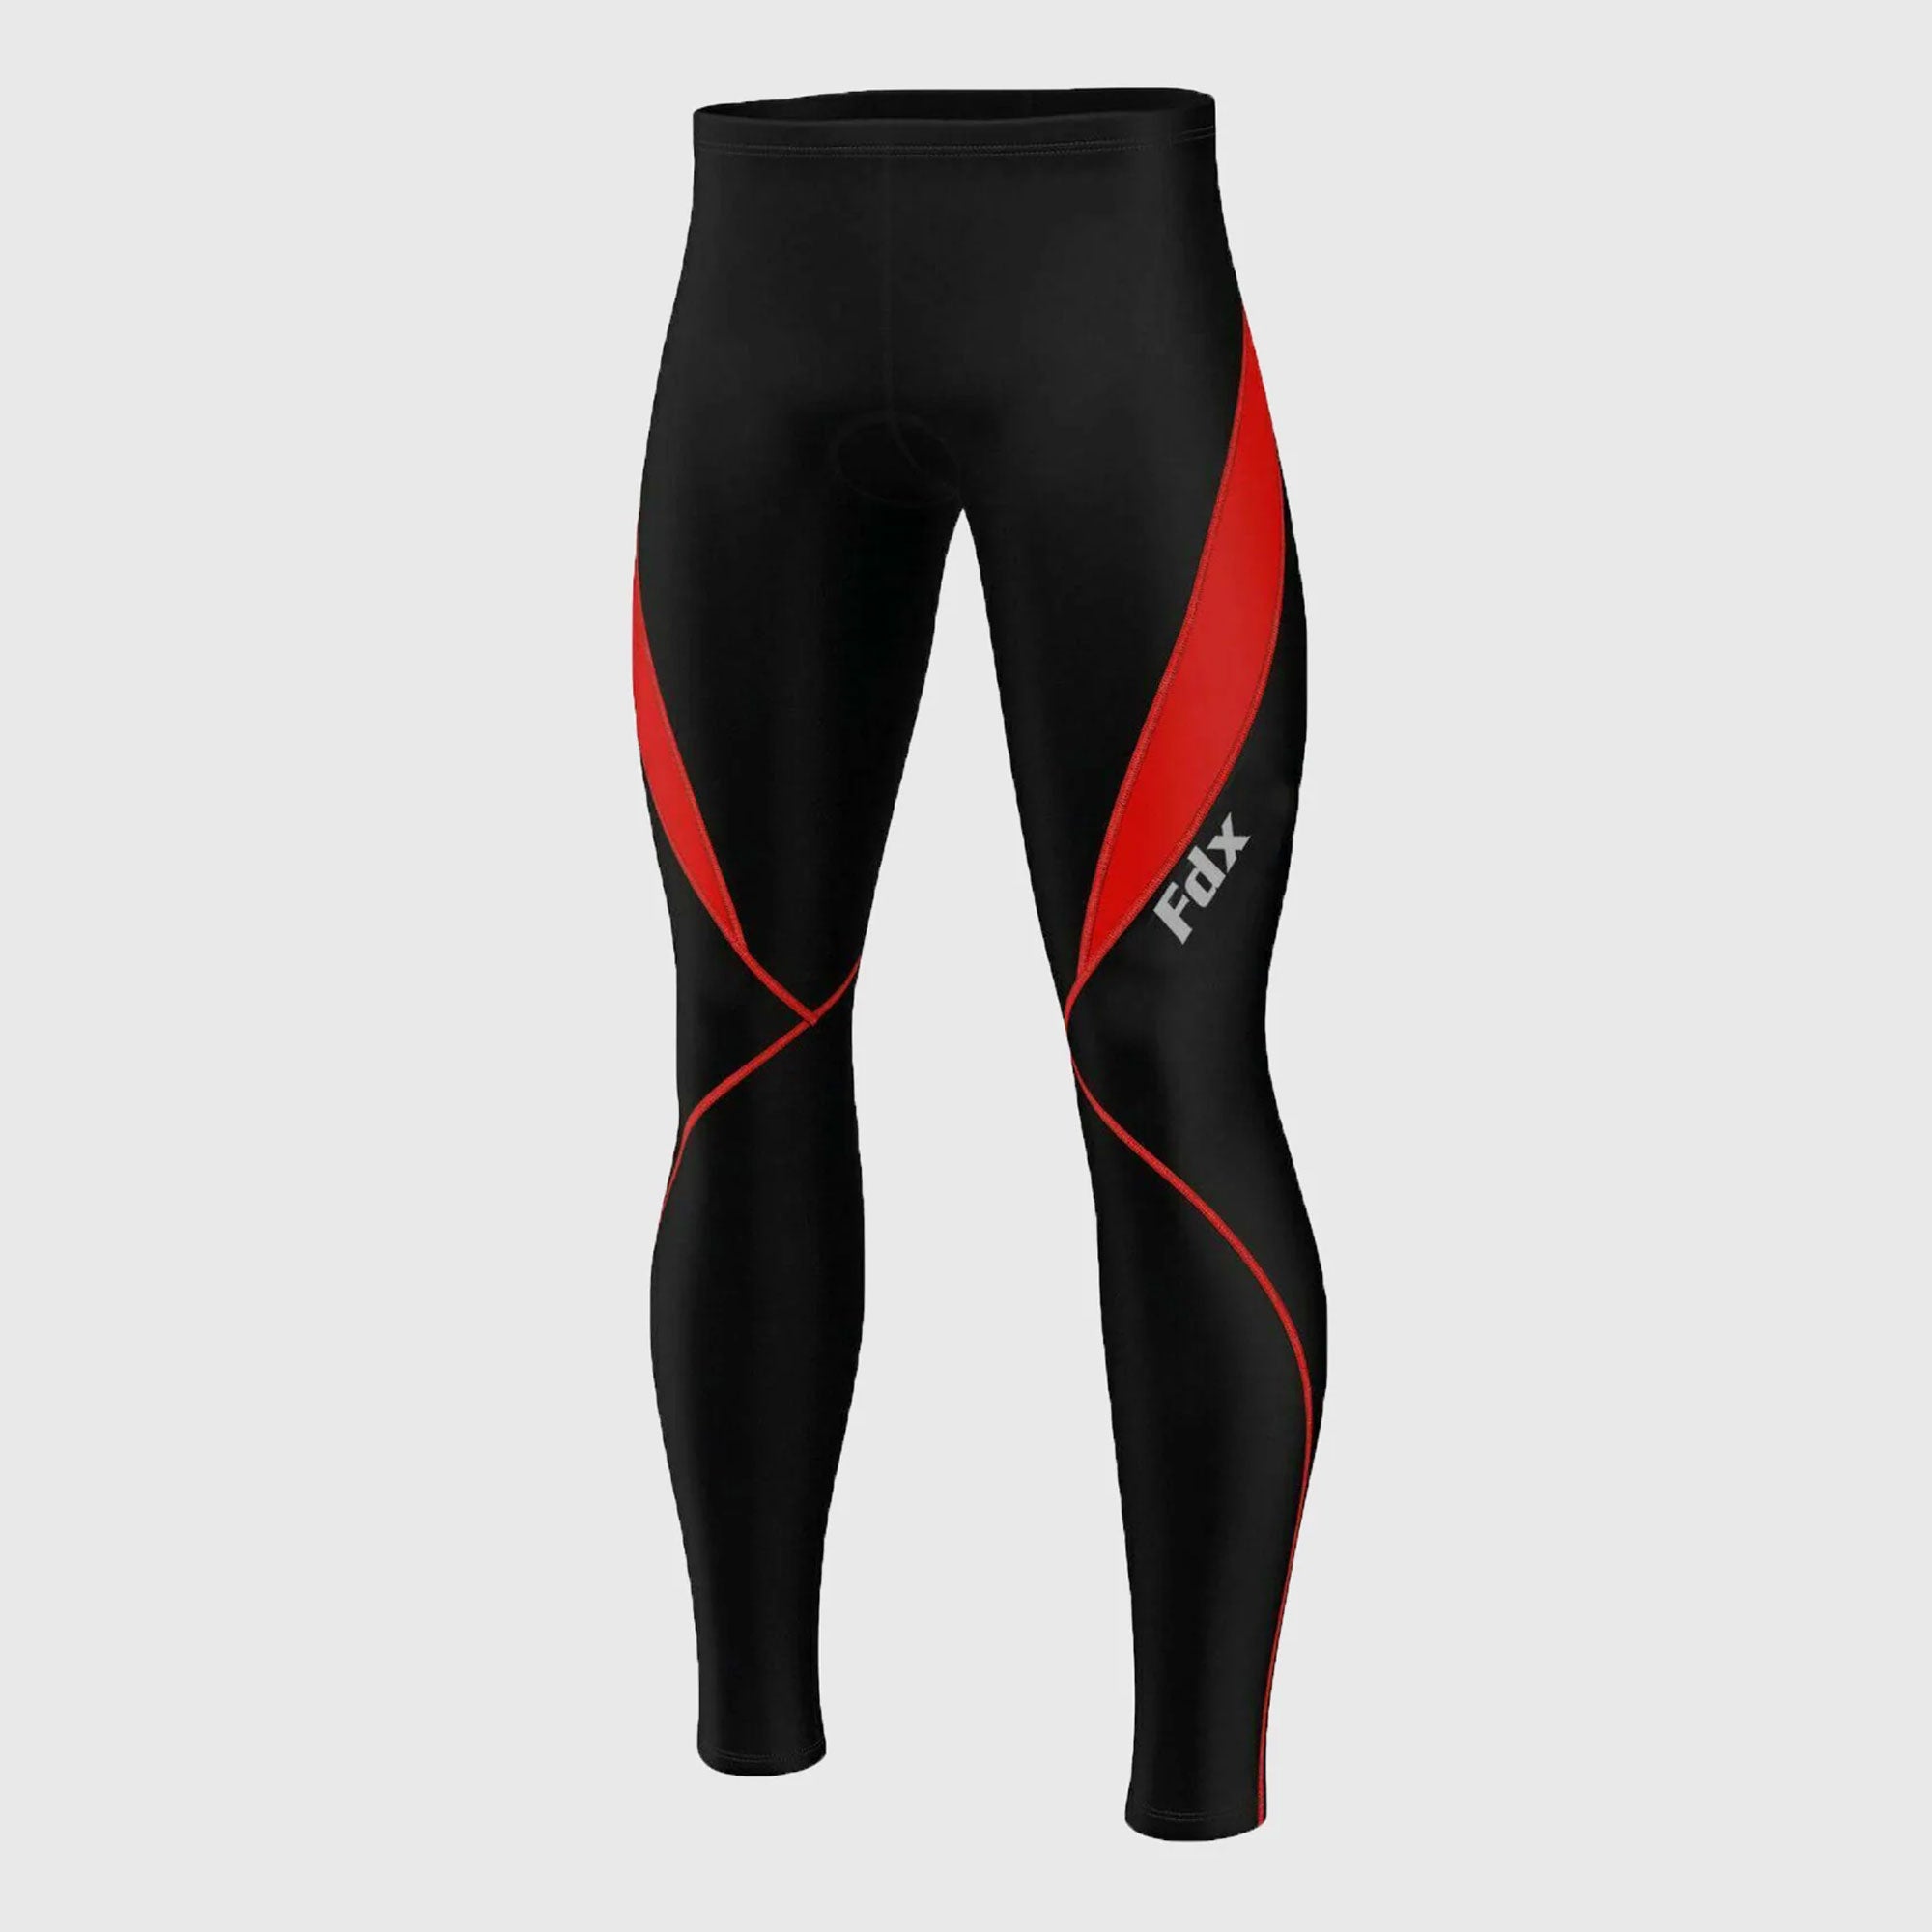 Fdx Viper Men's Red Thermal Padded Cycling Tights